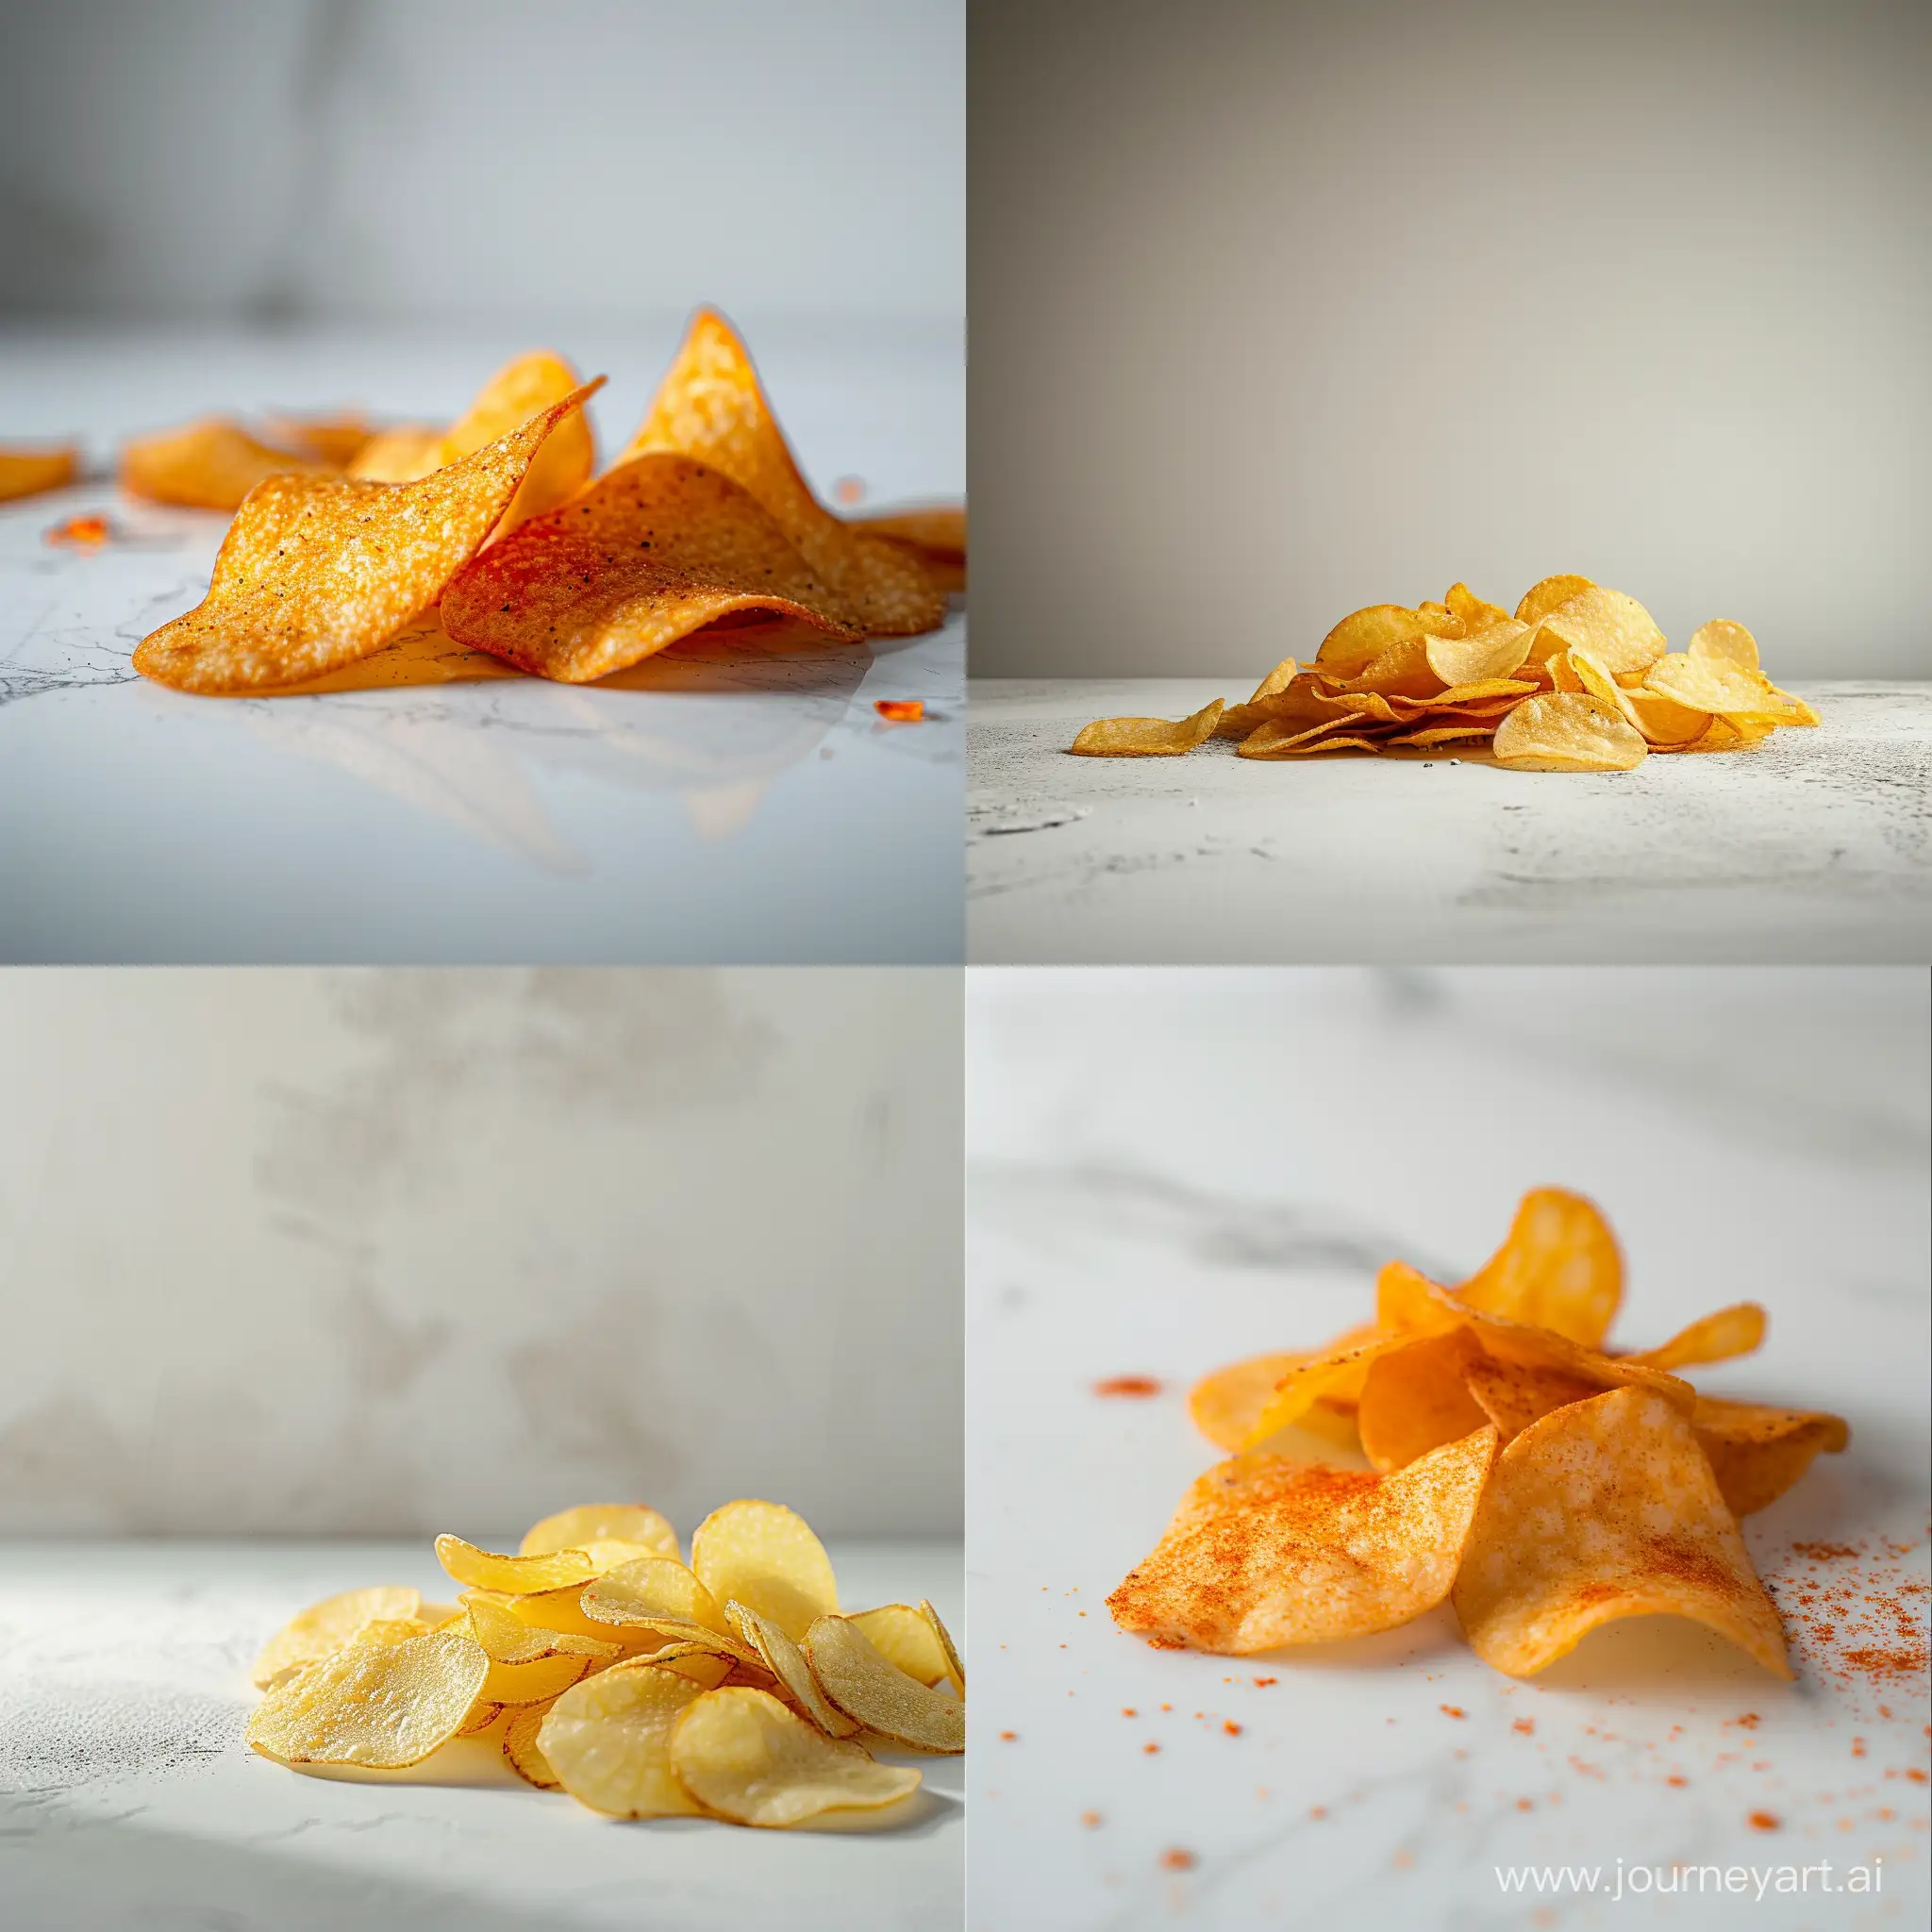 Exquisite-Promotional-Photography-Chips-Display-on-White-Table